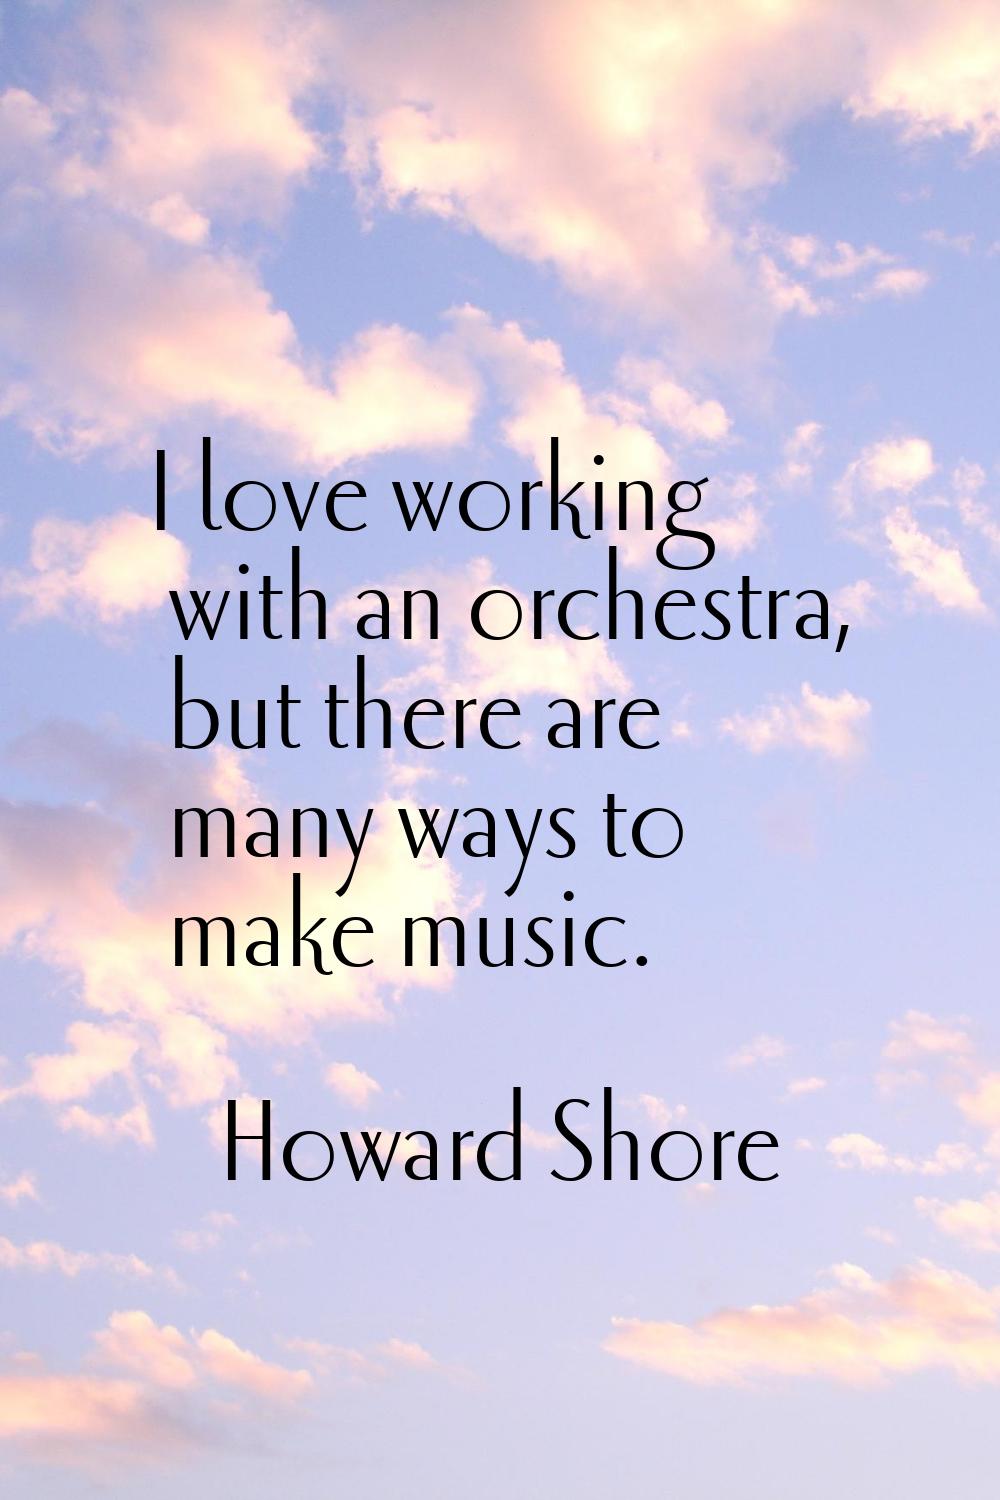 I love working with an orchestra, but there are many ways to make music.